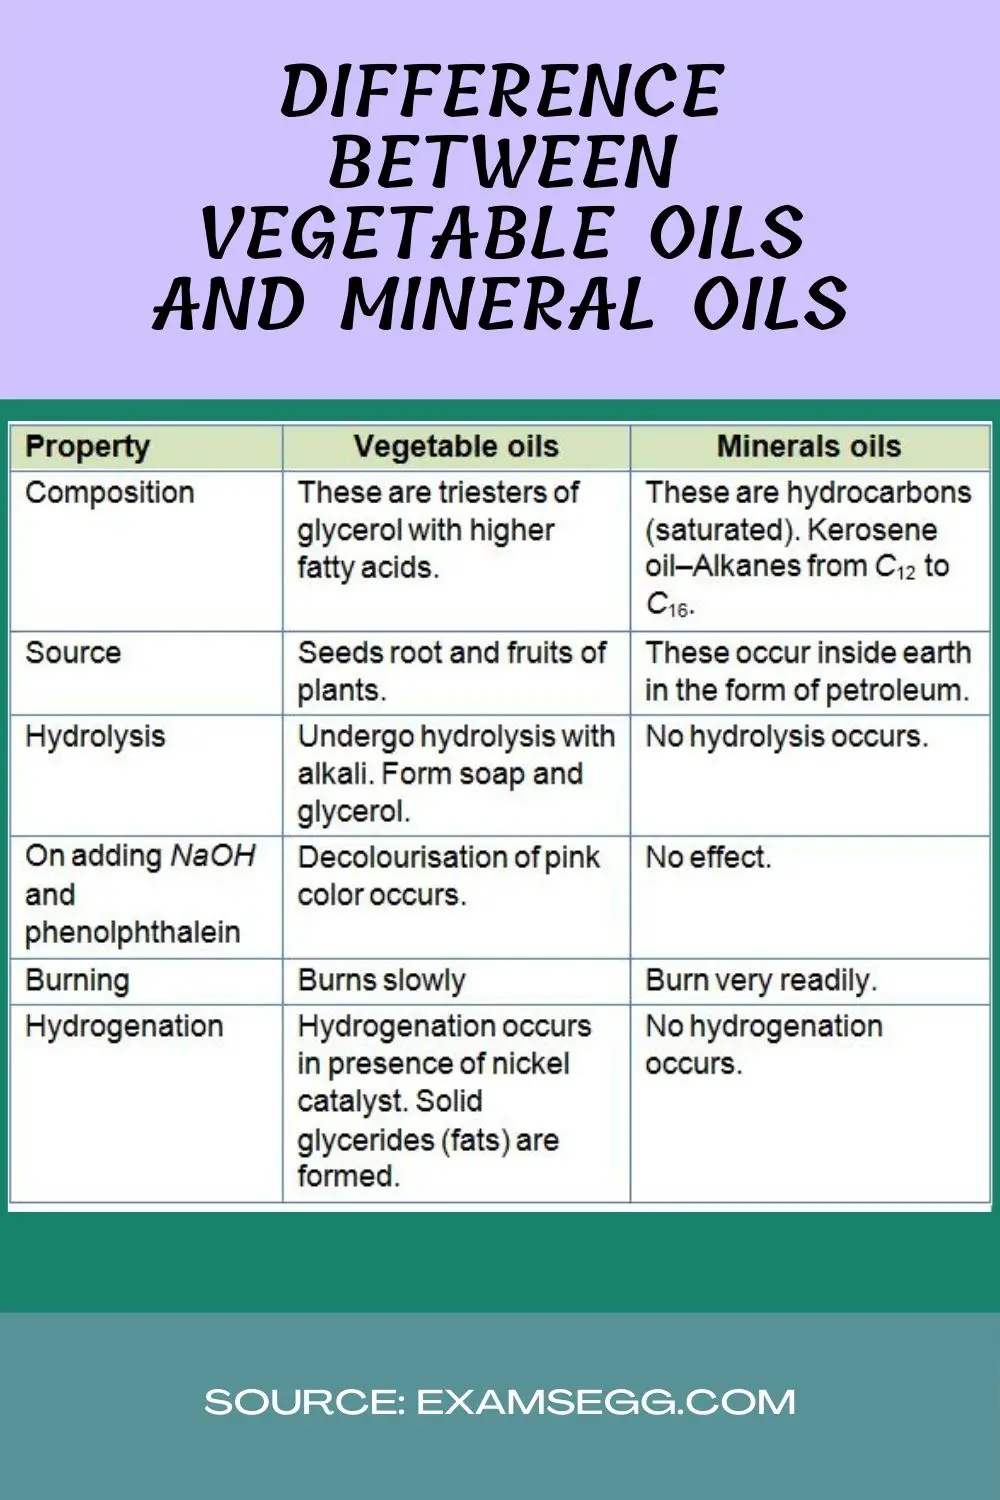 Difference between Vegetable Oils and Mineral Oils